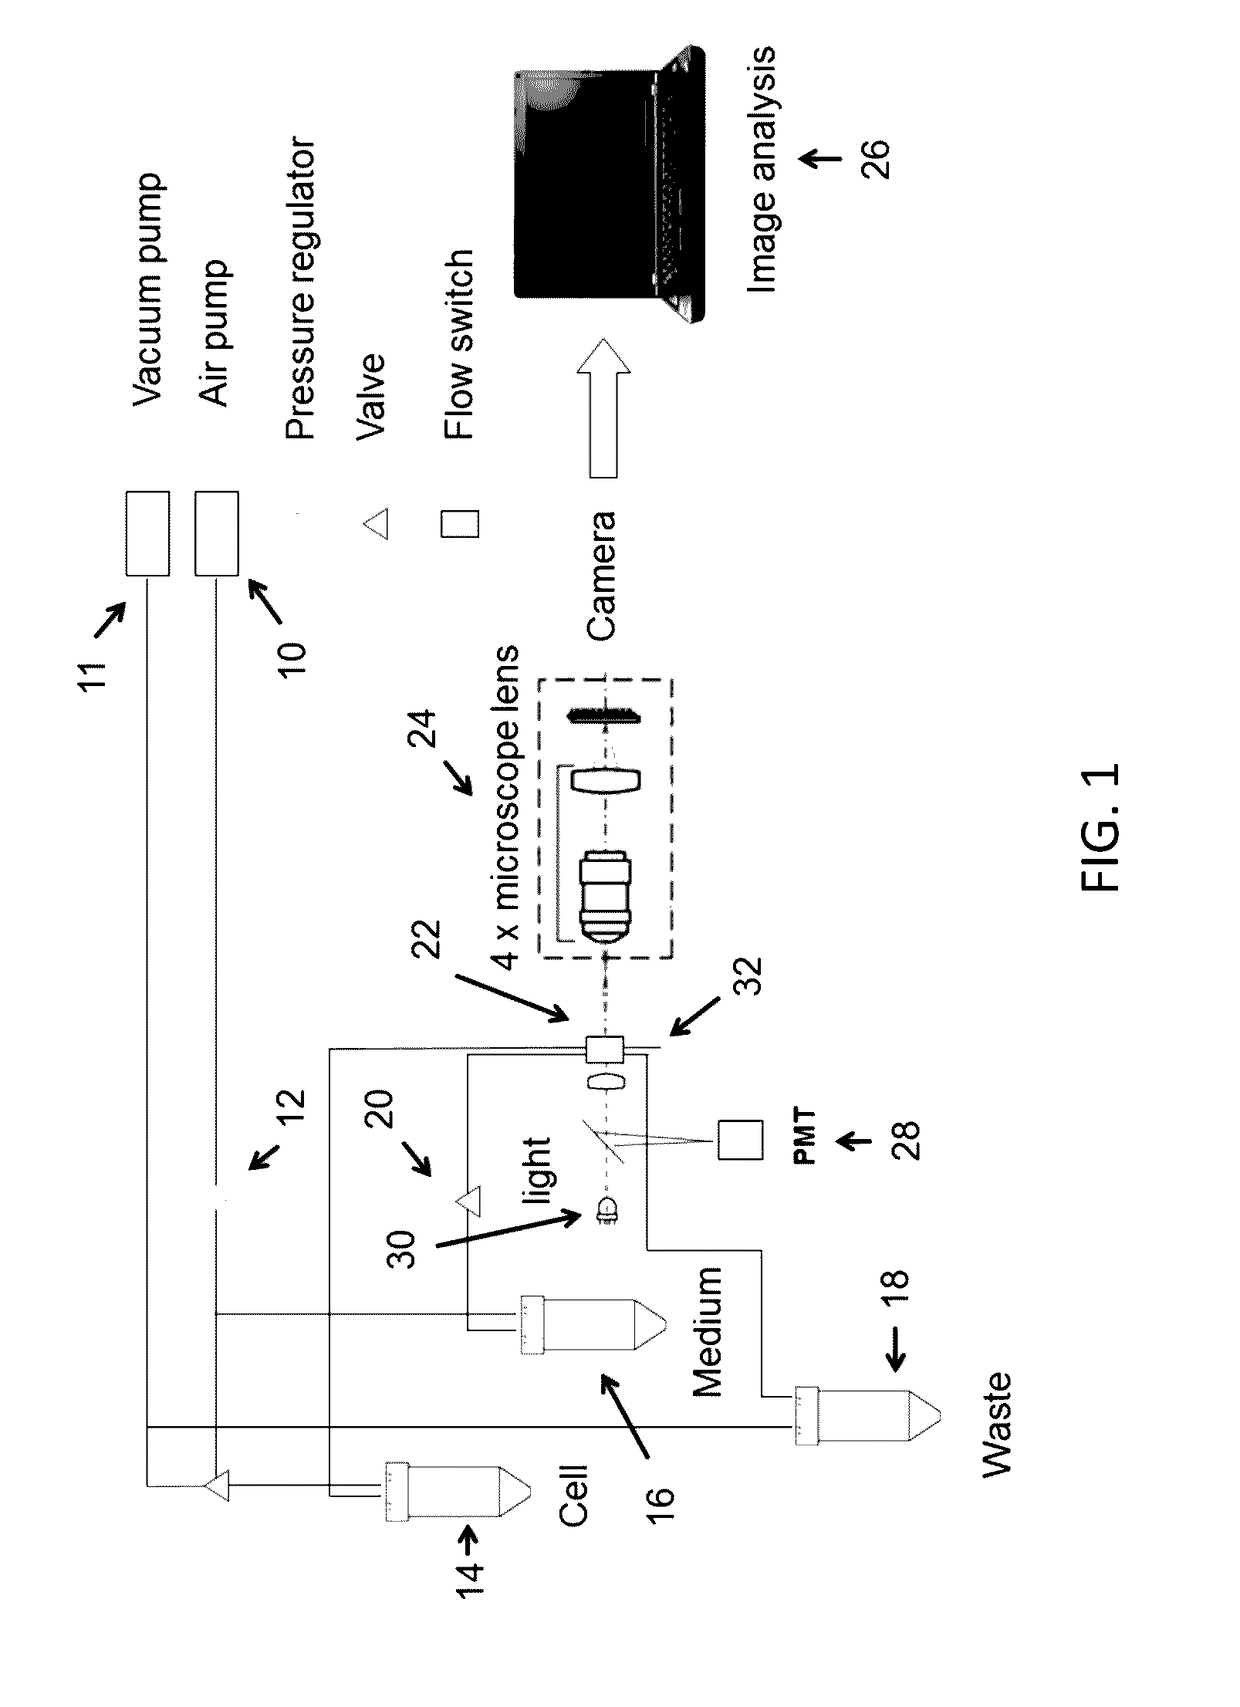 Method and apparatus for bulk microparticle sorting using a microfluidic channel